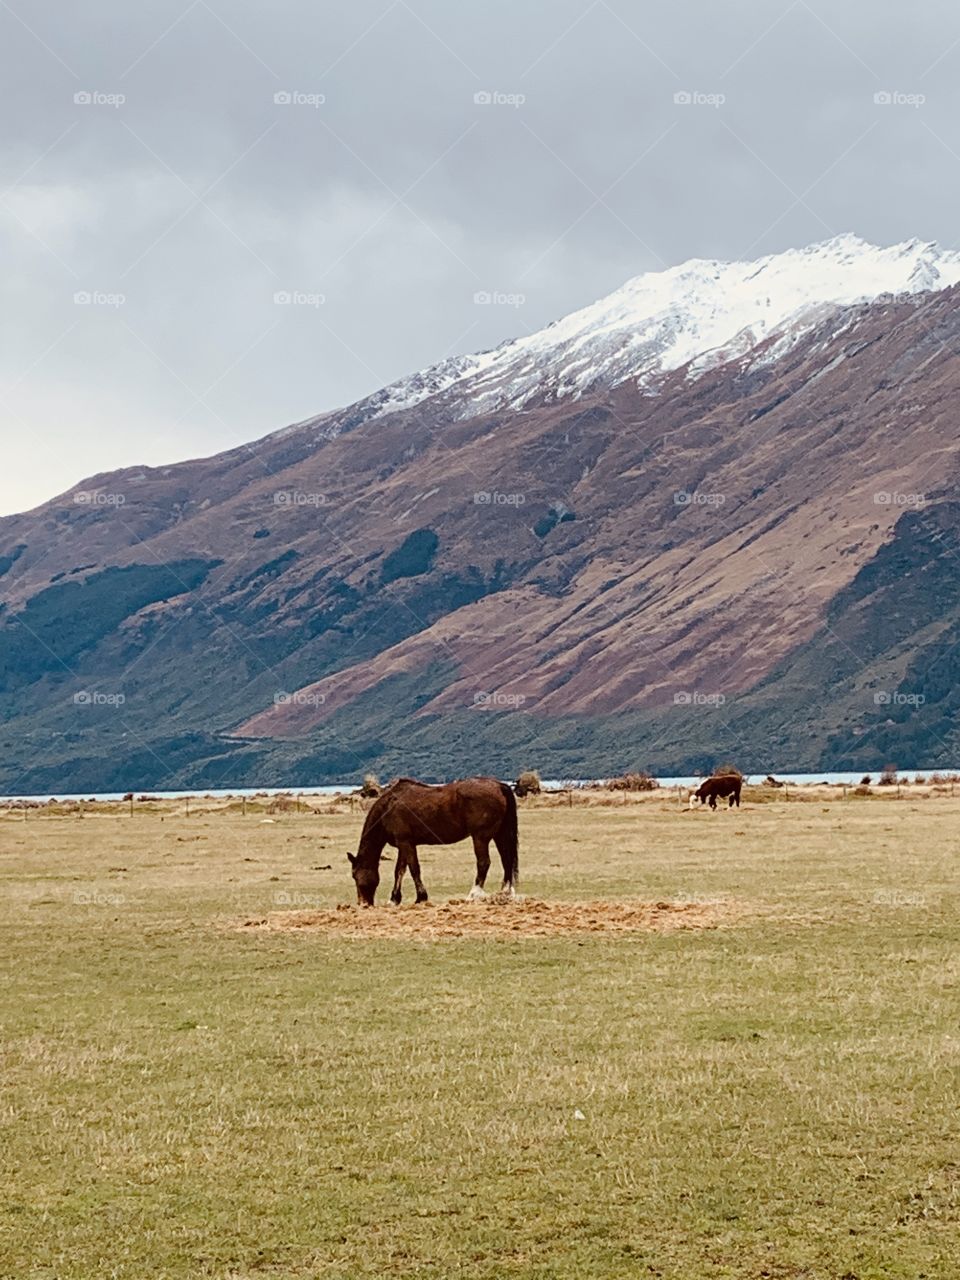 A cool and lovely morning at Mt Nicholas Farm, Queenstown New Zealand. Horses were grazing...